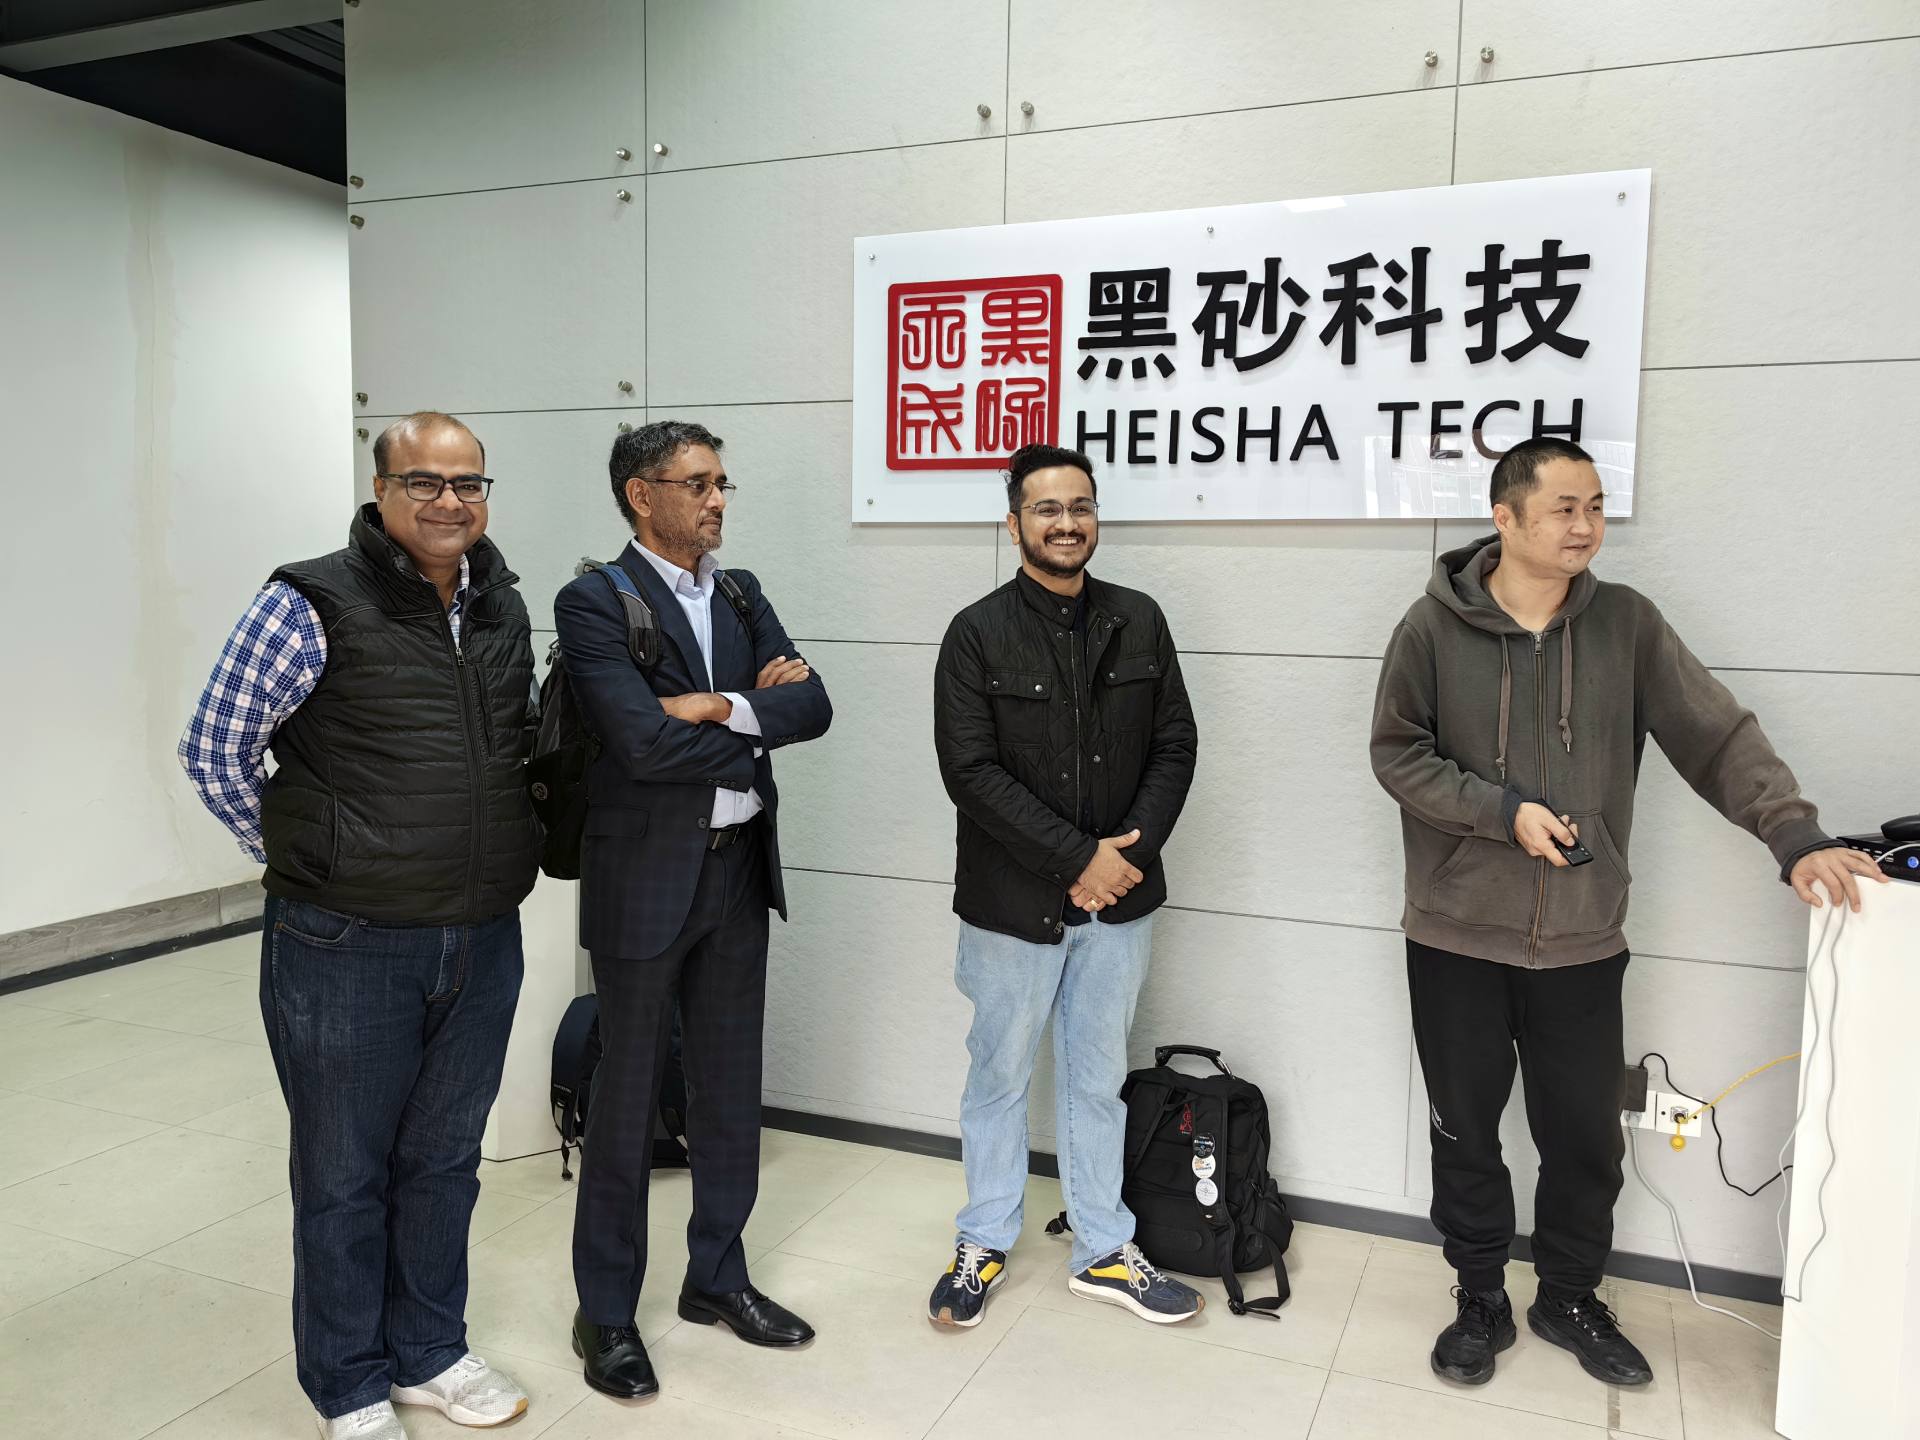 FlytBase has visited HEISHA for further cooperation